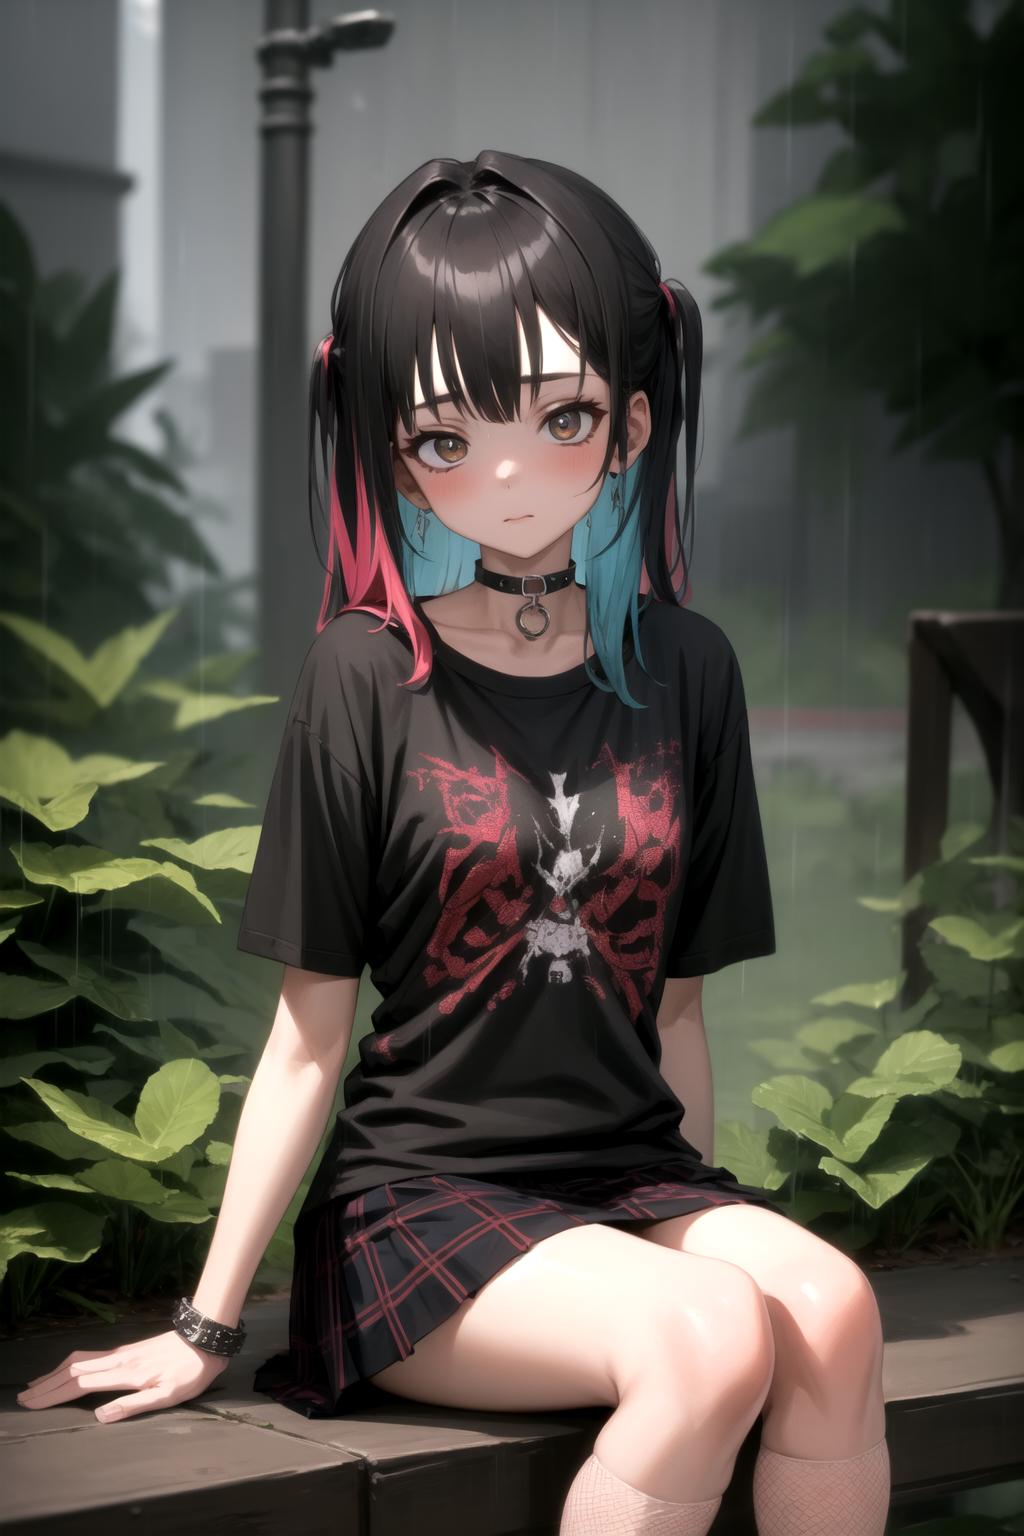 Punk rock anime girl Picture #101272363 | Blingee.com